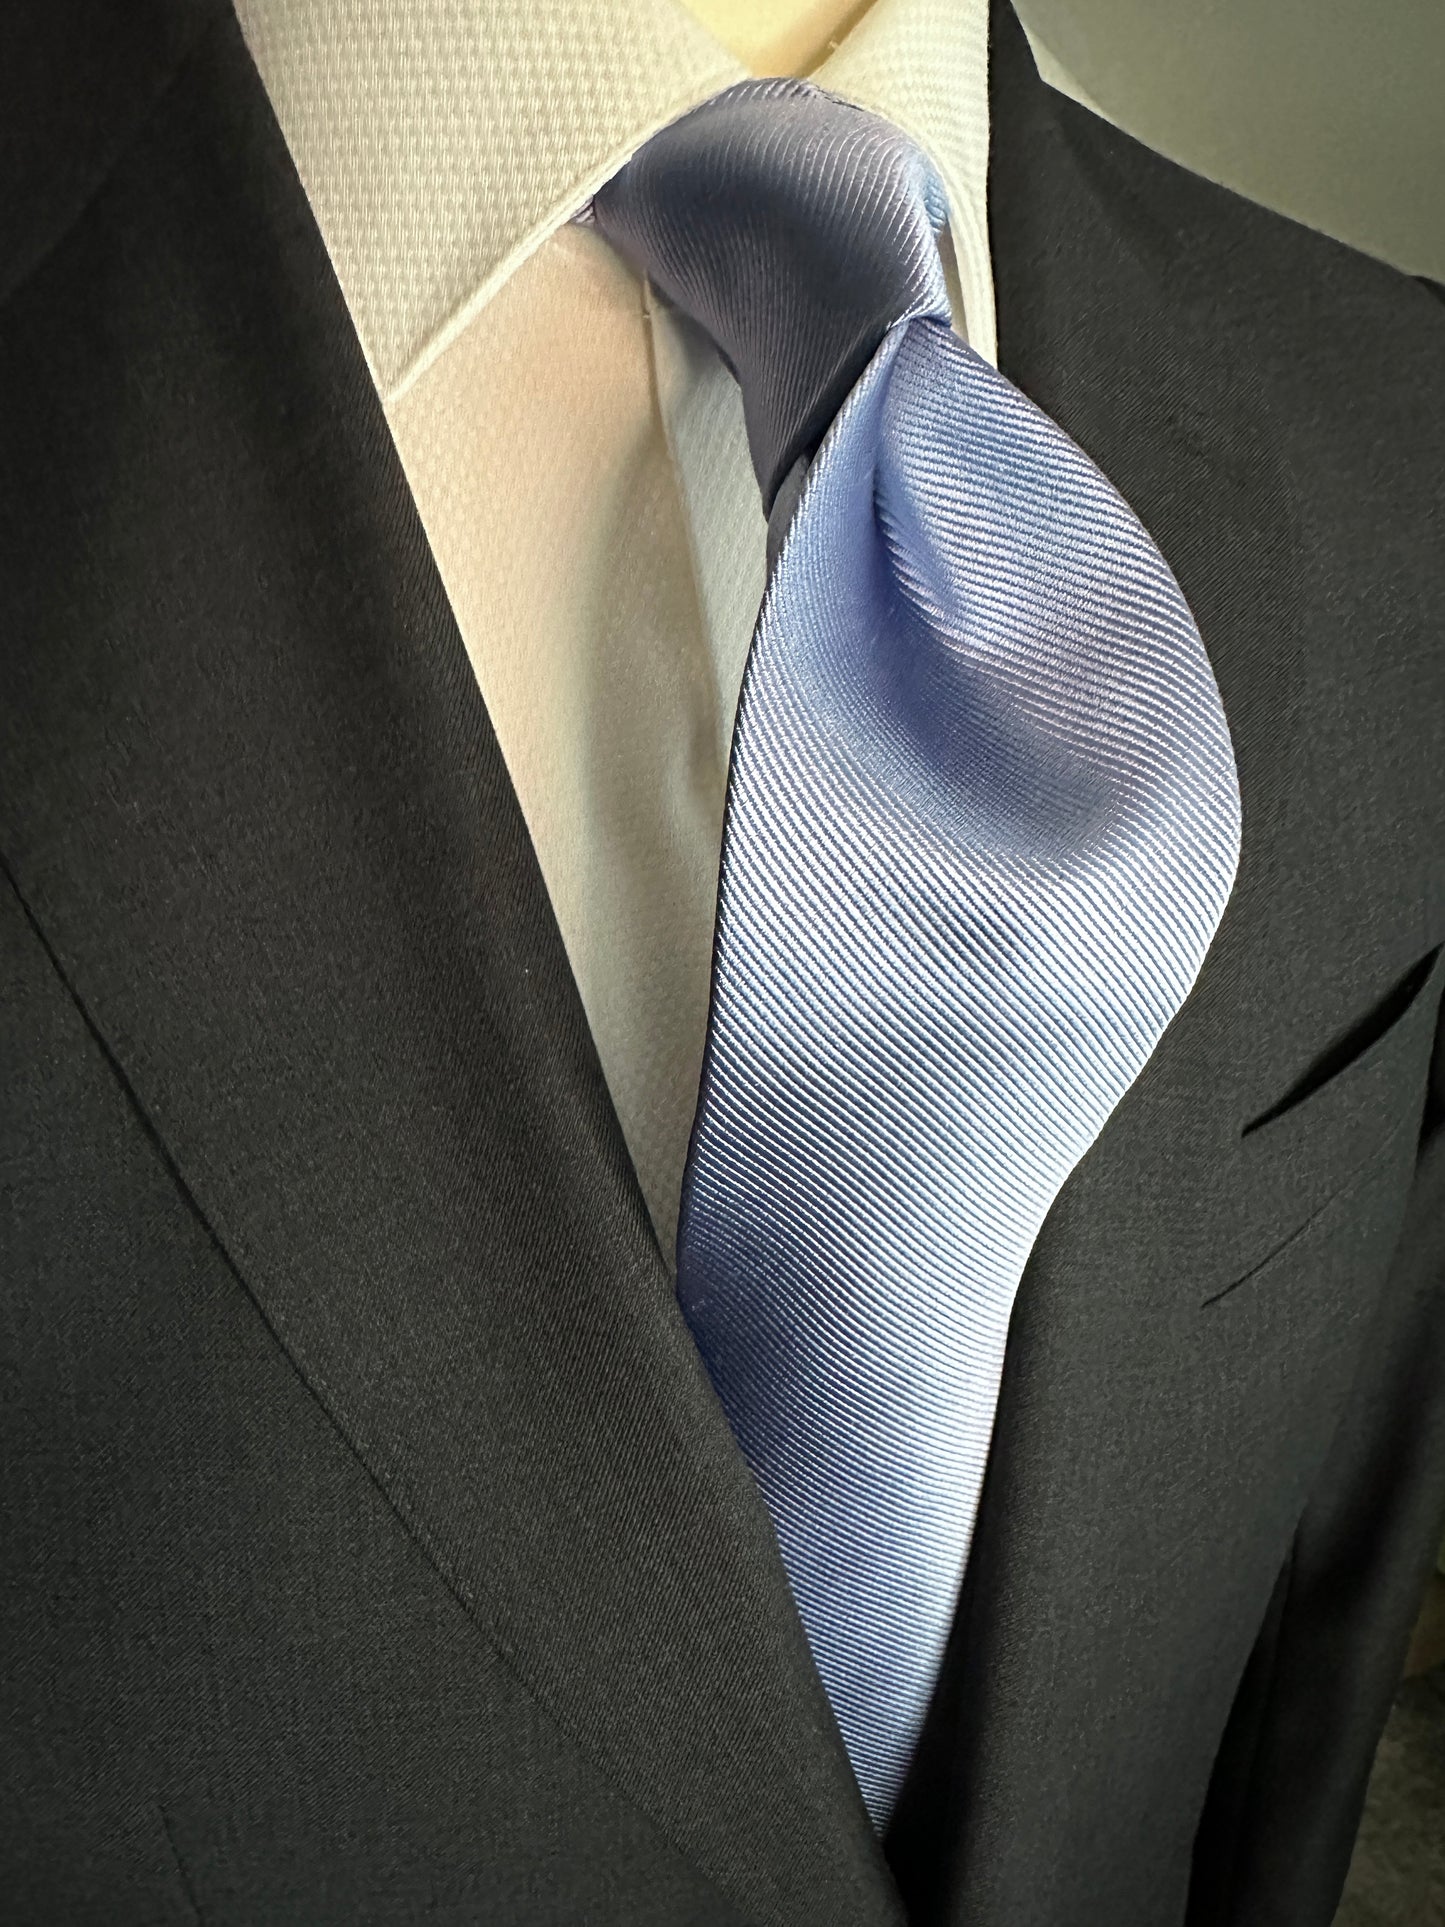 Solid ties are beautifully paired with the more busy of patters of bold stripes and heavy plaids. However, there is something so understated and elegant about a solid tie with a solid suit. Whether that be navy, charcoal or black a sky blue tie fits well with a white shirt and even a navy blazer with jeans.